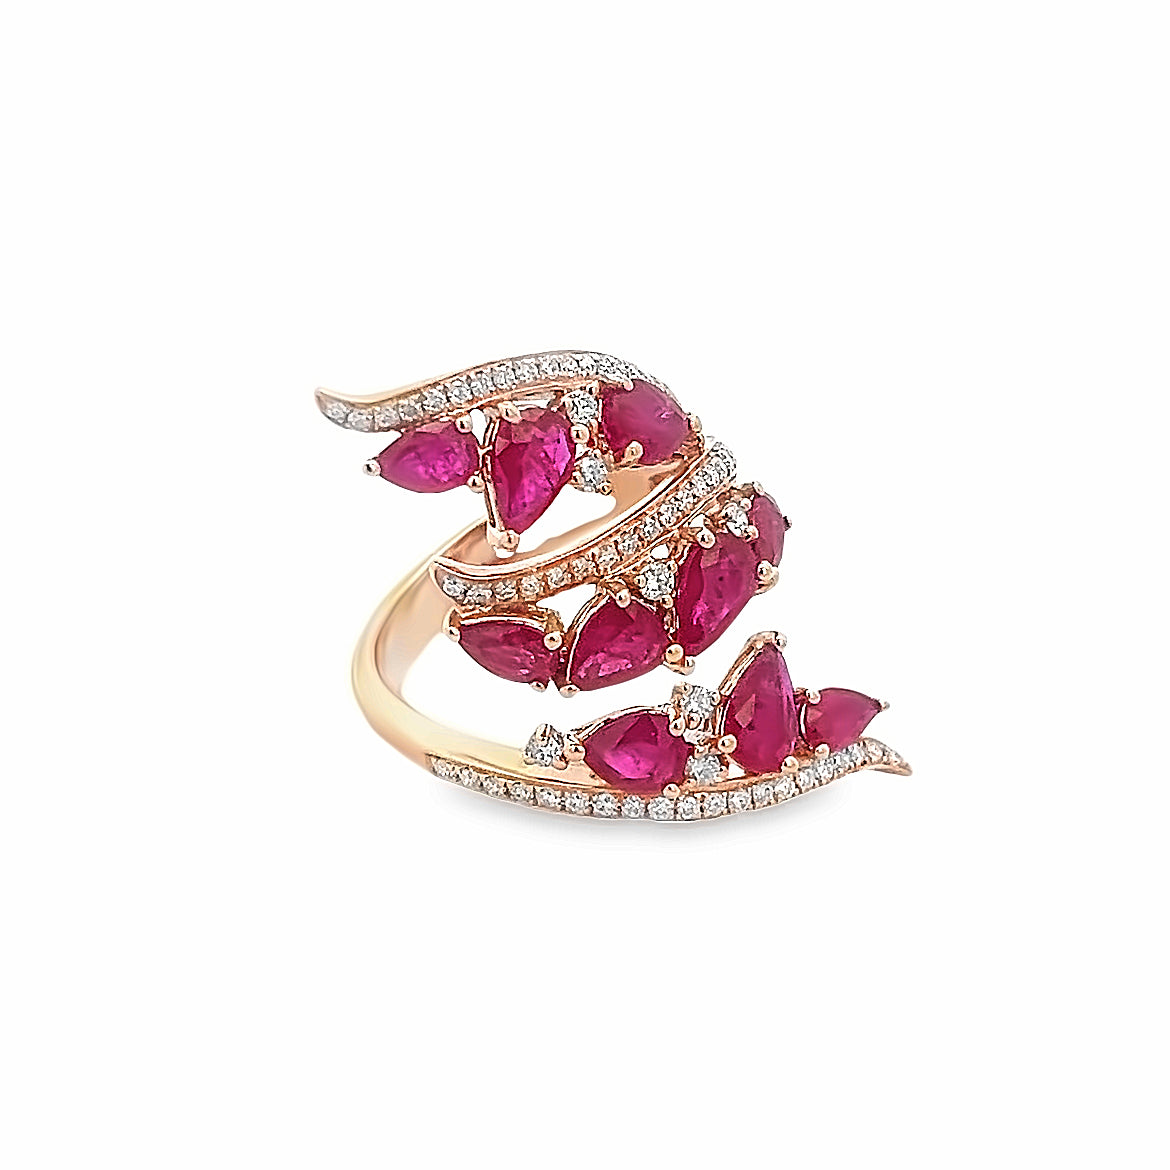 18K ROSE GOLD WRAP RING WITH RUBY